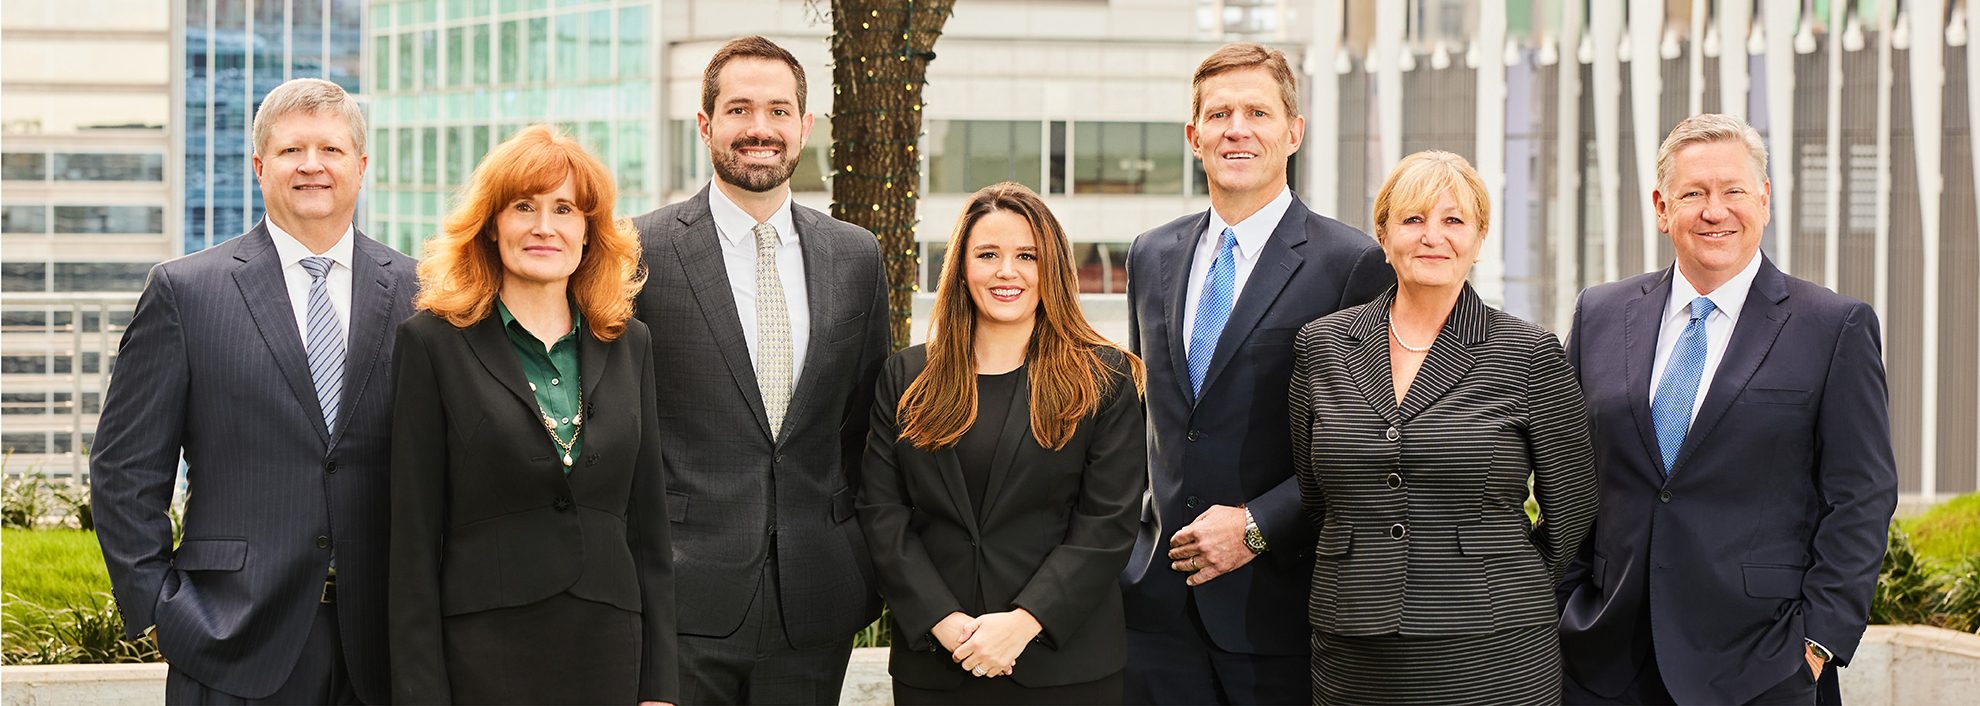 DeBeer, May, Hanna Wealth Management Group Photo